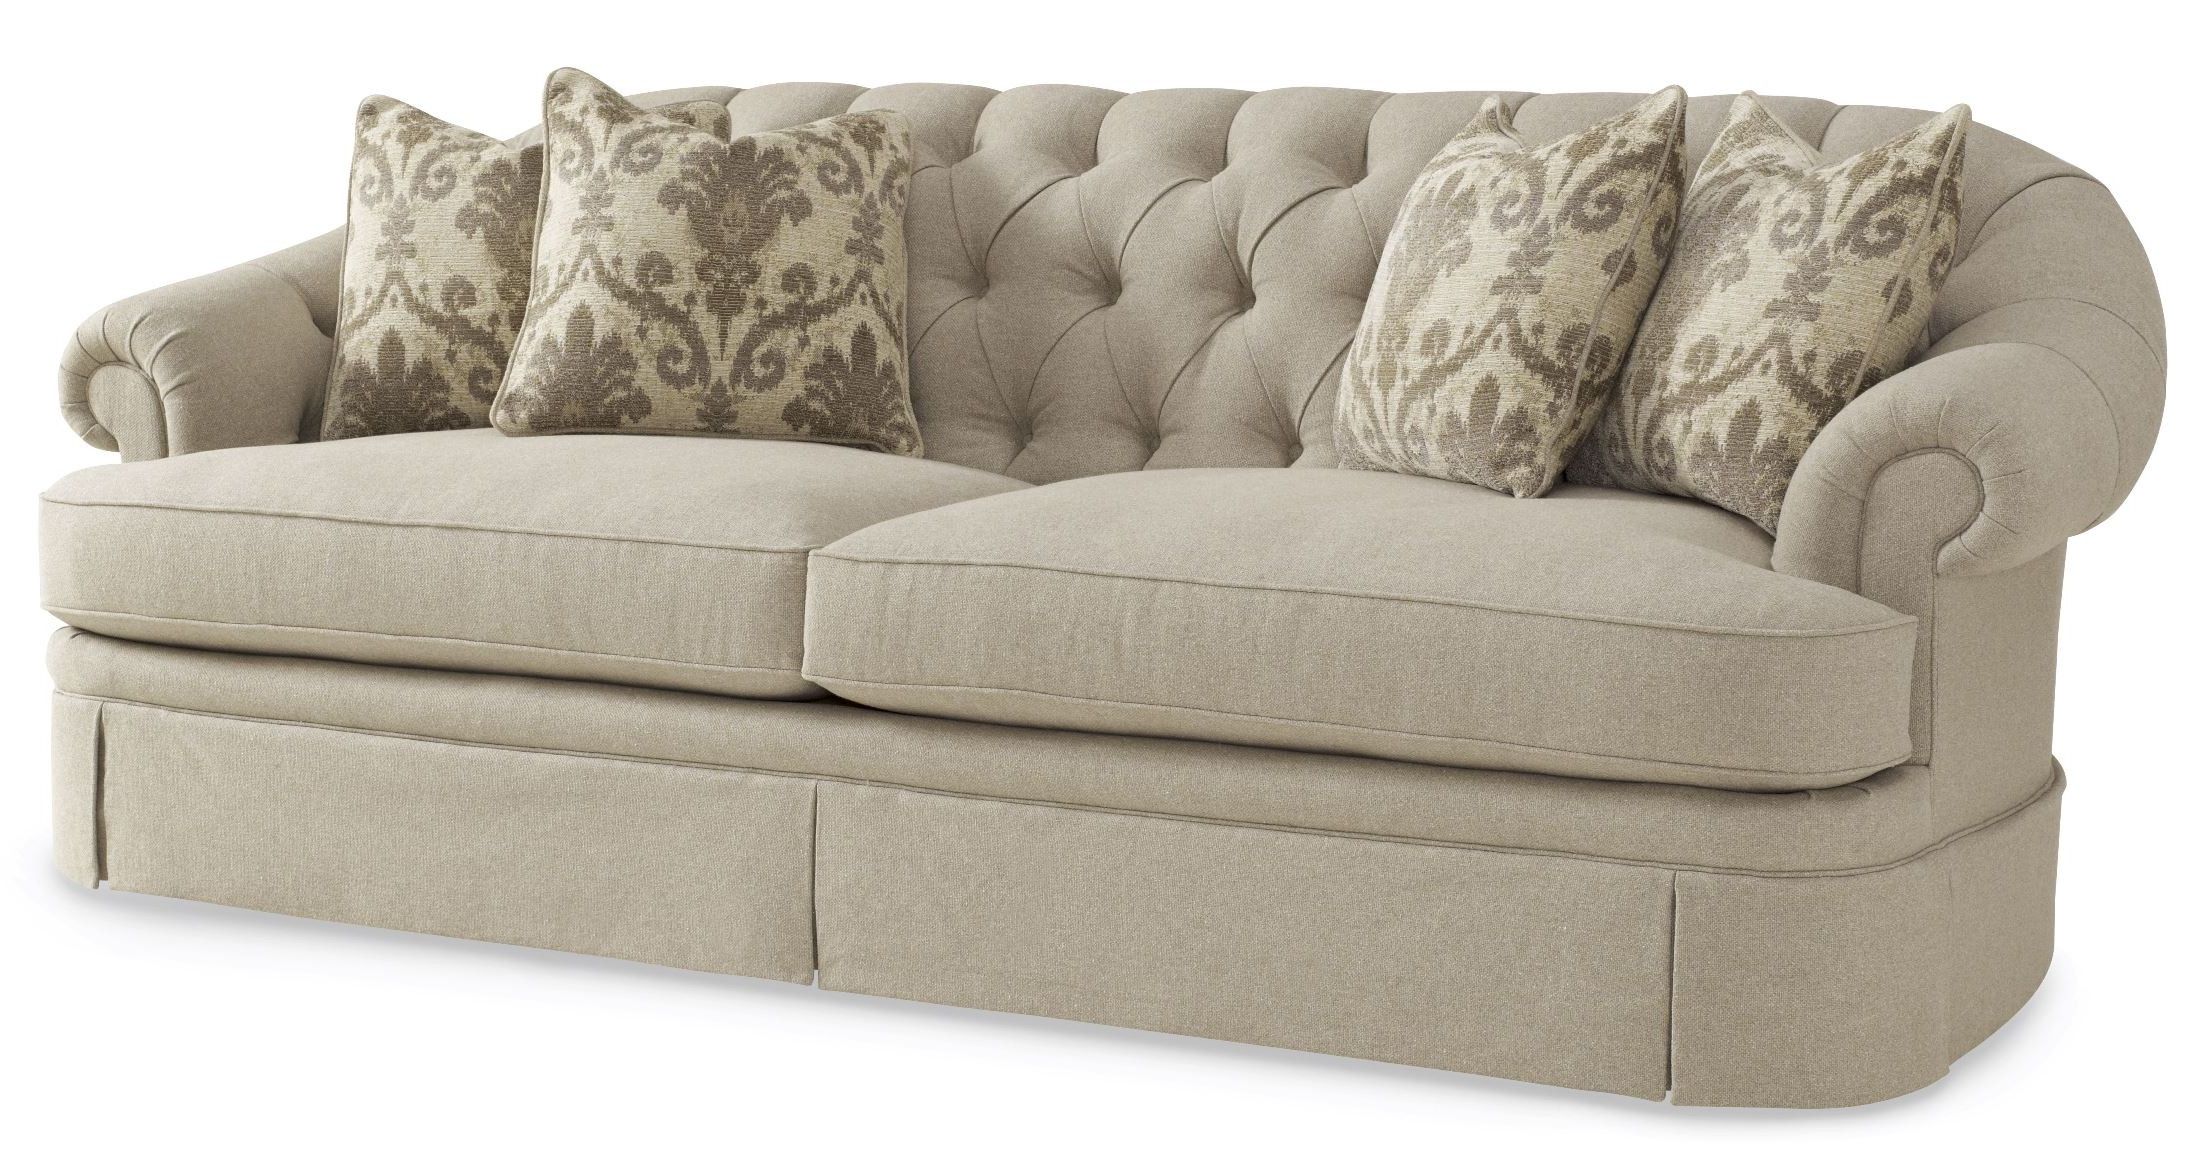 Favorite Tufted Upholstered Sofas With Regard To Collection One Upholstered Oxford Tufted Skirted Sofa From Art ( (View 8 of 15)